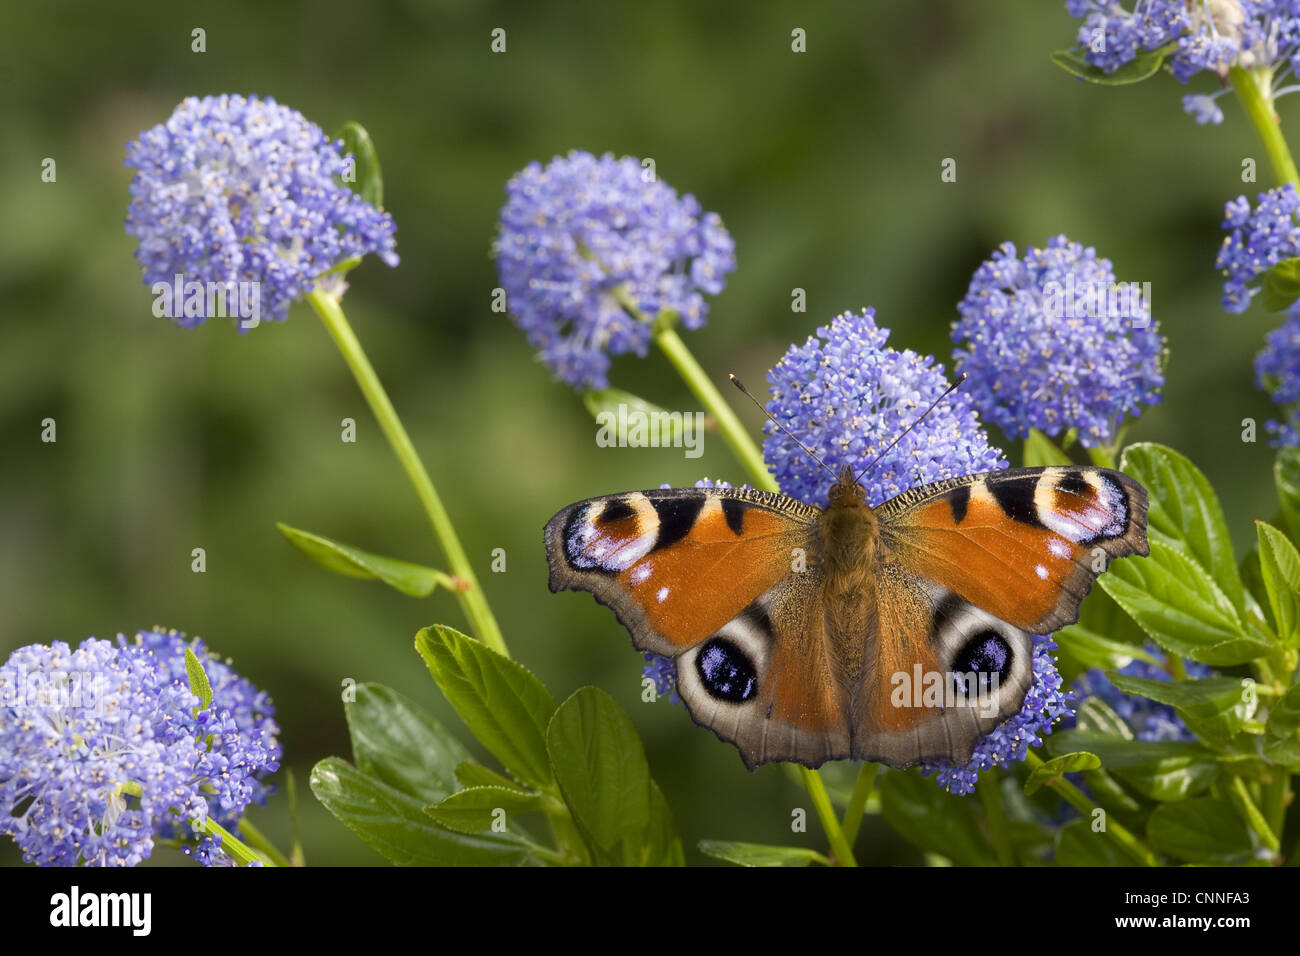 Peacock Butterfly (Inachis io) adult, feeding on California Lilac (Ceanothus arboreus) flowers in garden, England, june Stock Photo